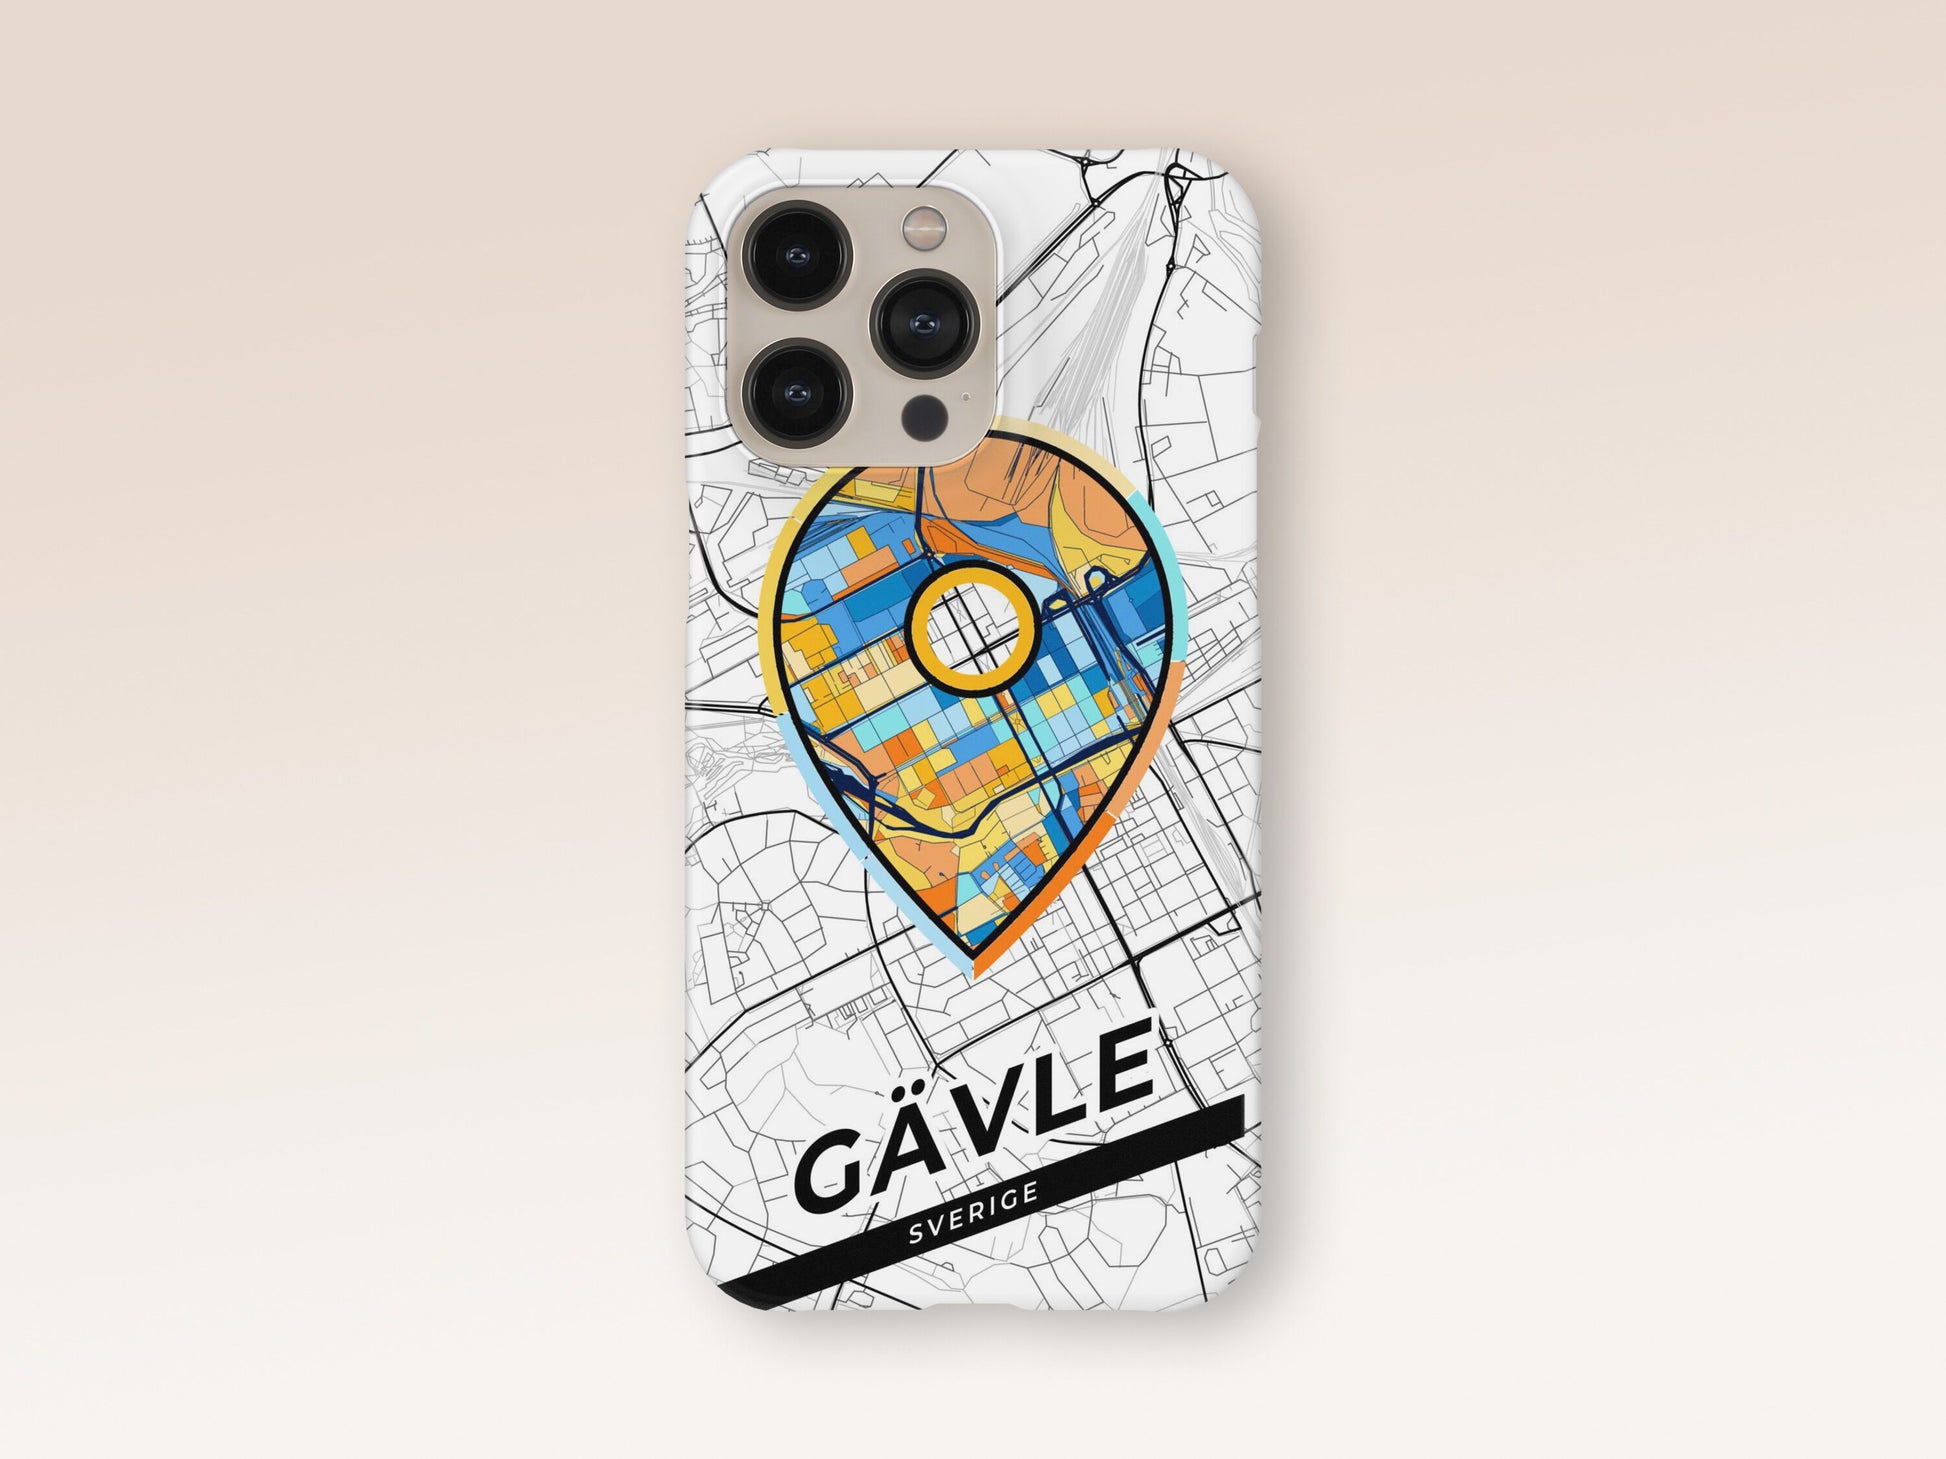 Gävle Sweden slim phone case with colorful icon. Birthday, wedding or housewarming gift. Couple match cases. 1